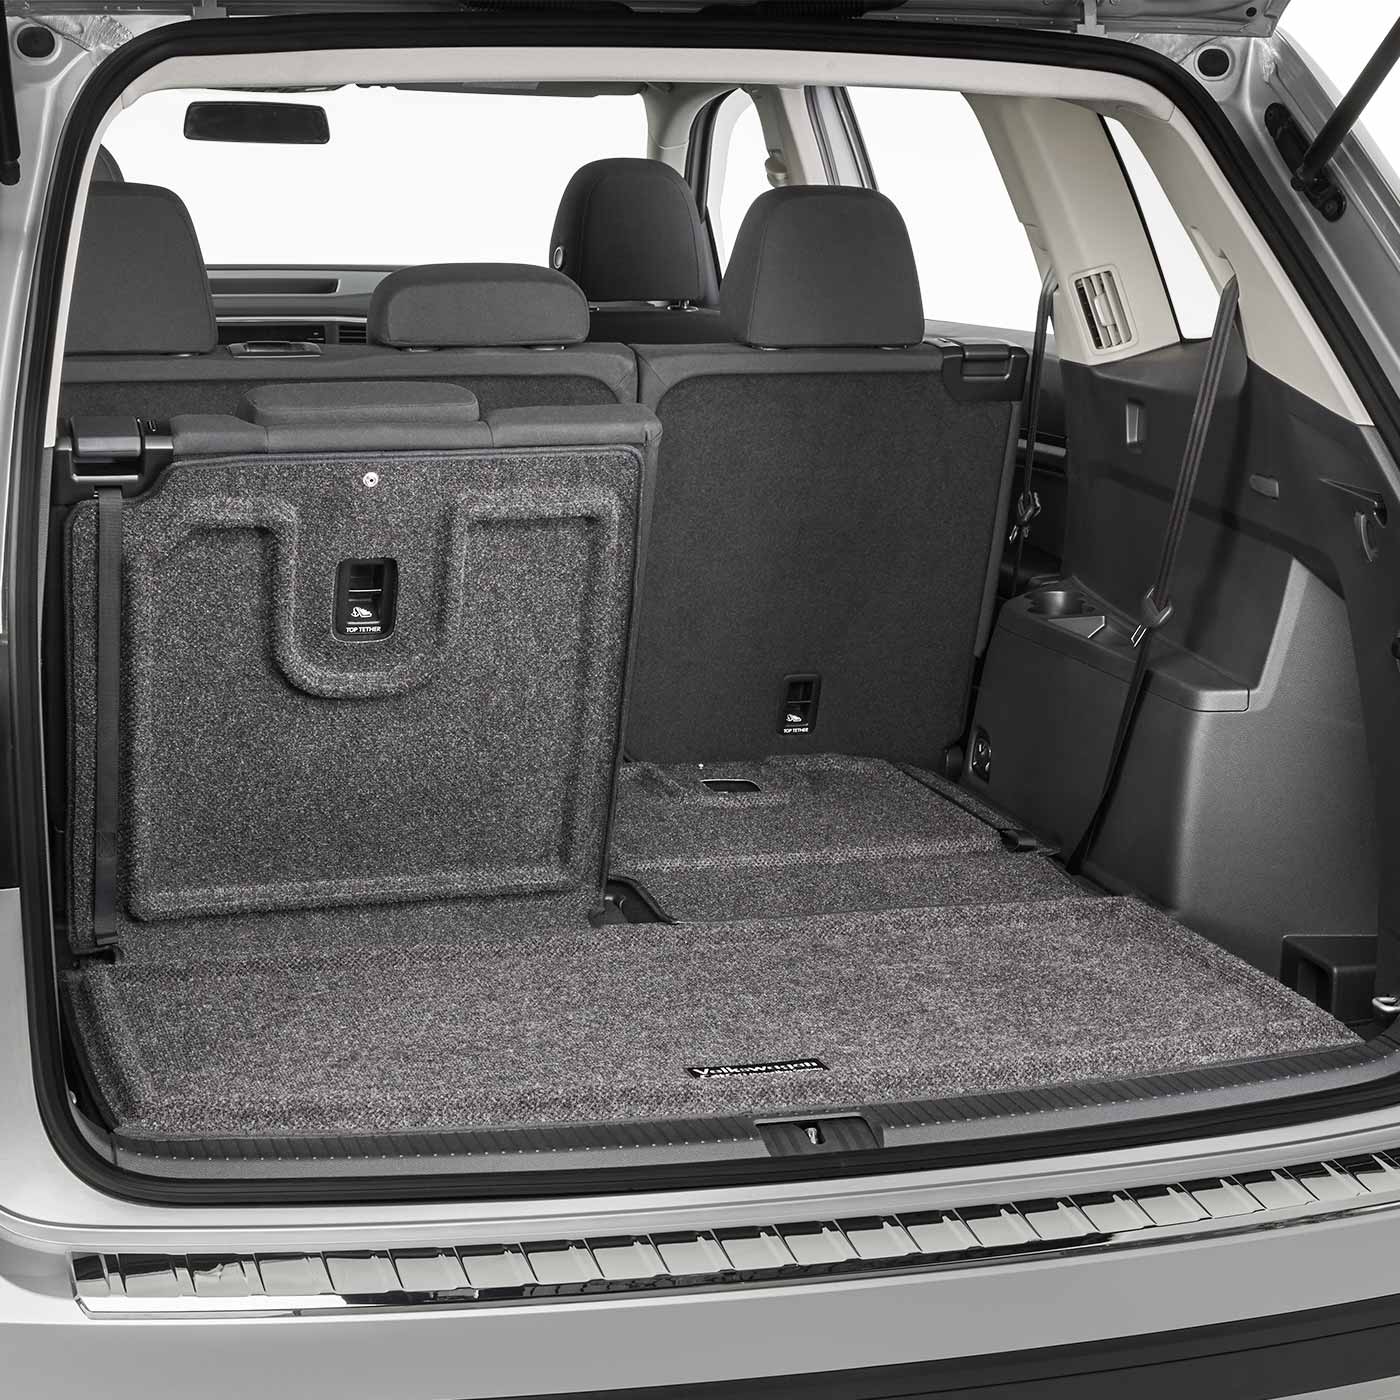 Volkswagen Trunk Liner with Seat Back Cover | VW Service and Parts